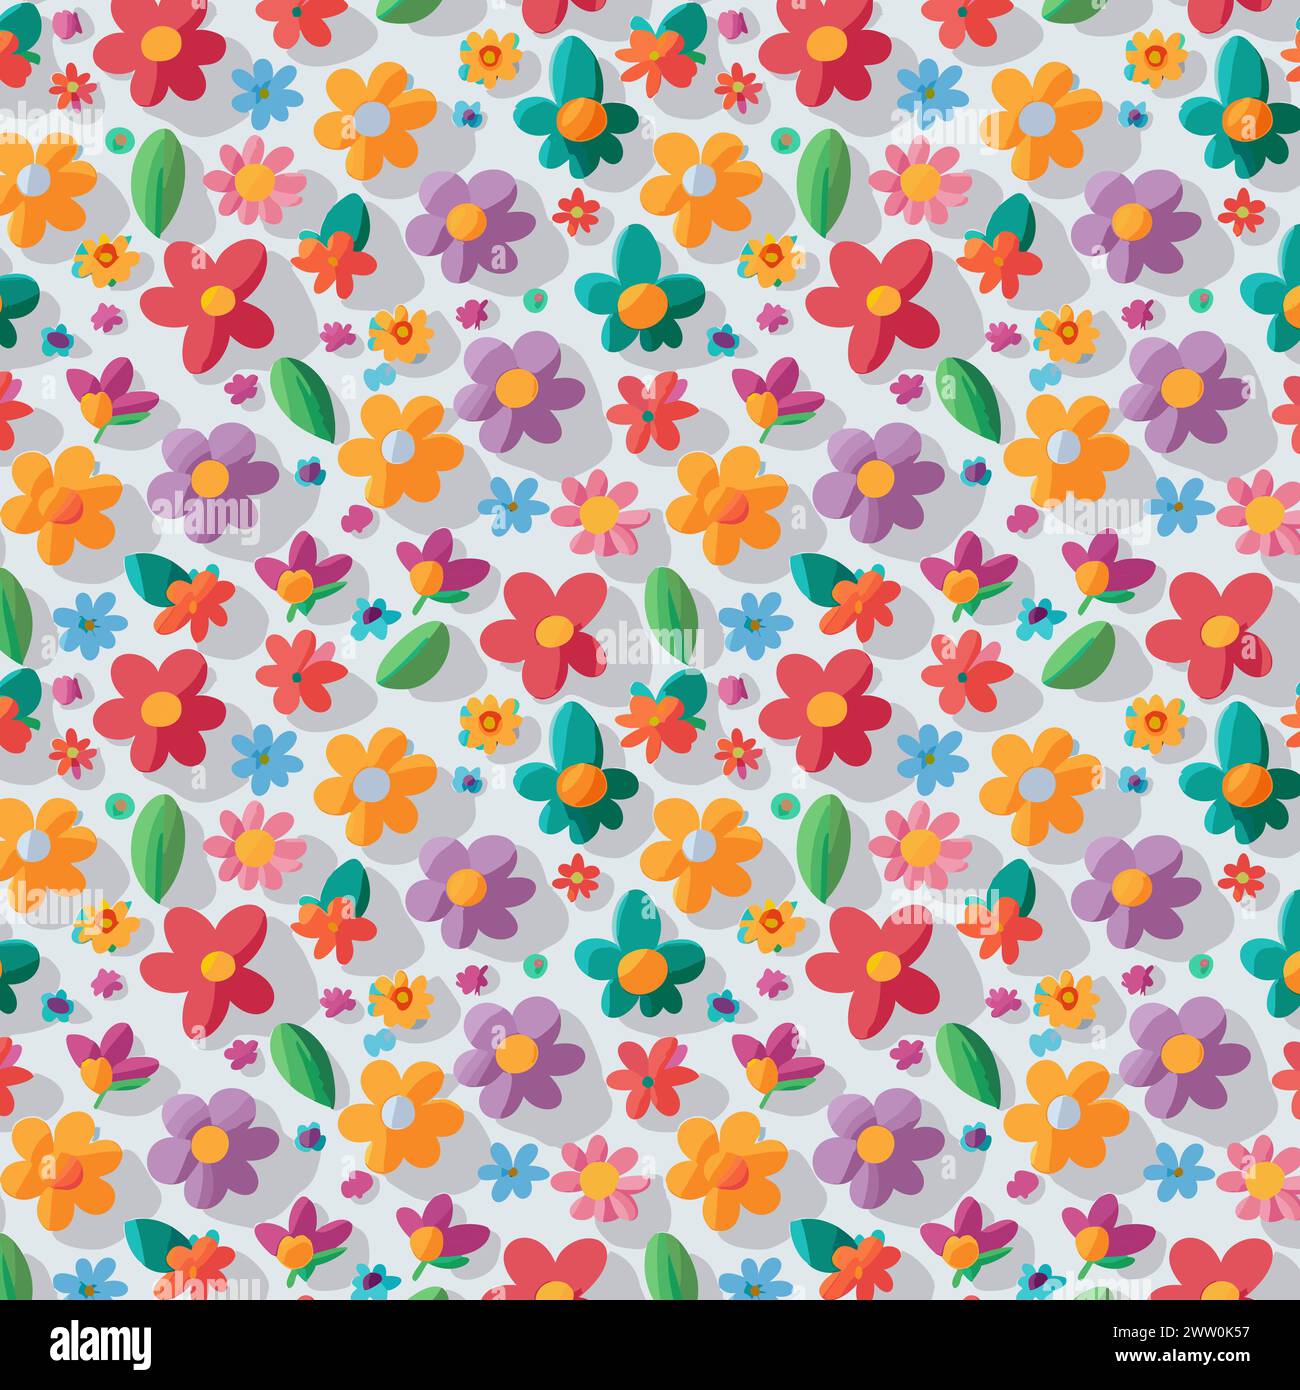 Flower pattern with leaves. Floral bouquets flower compositions. Floral pattern. Stock Vector